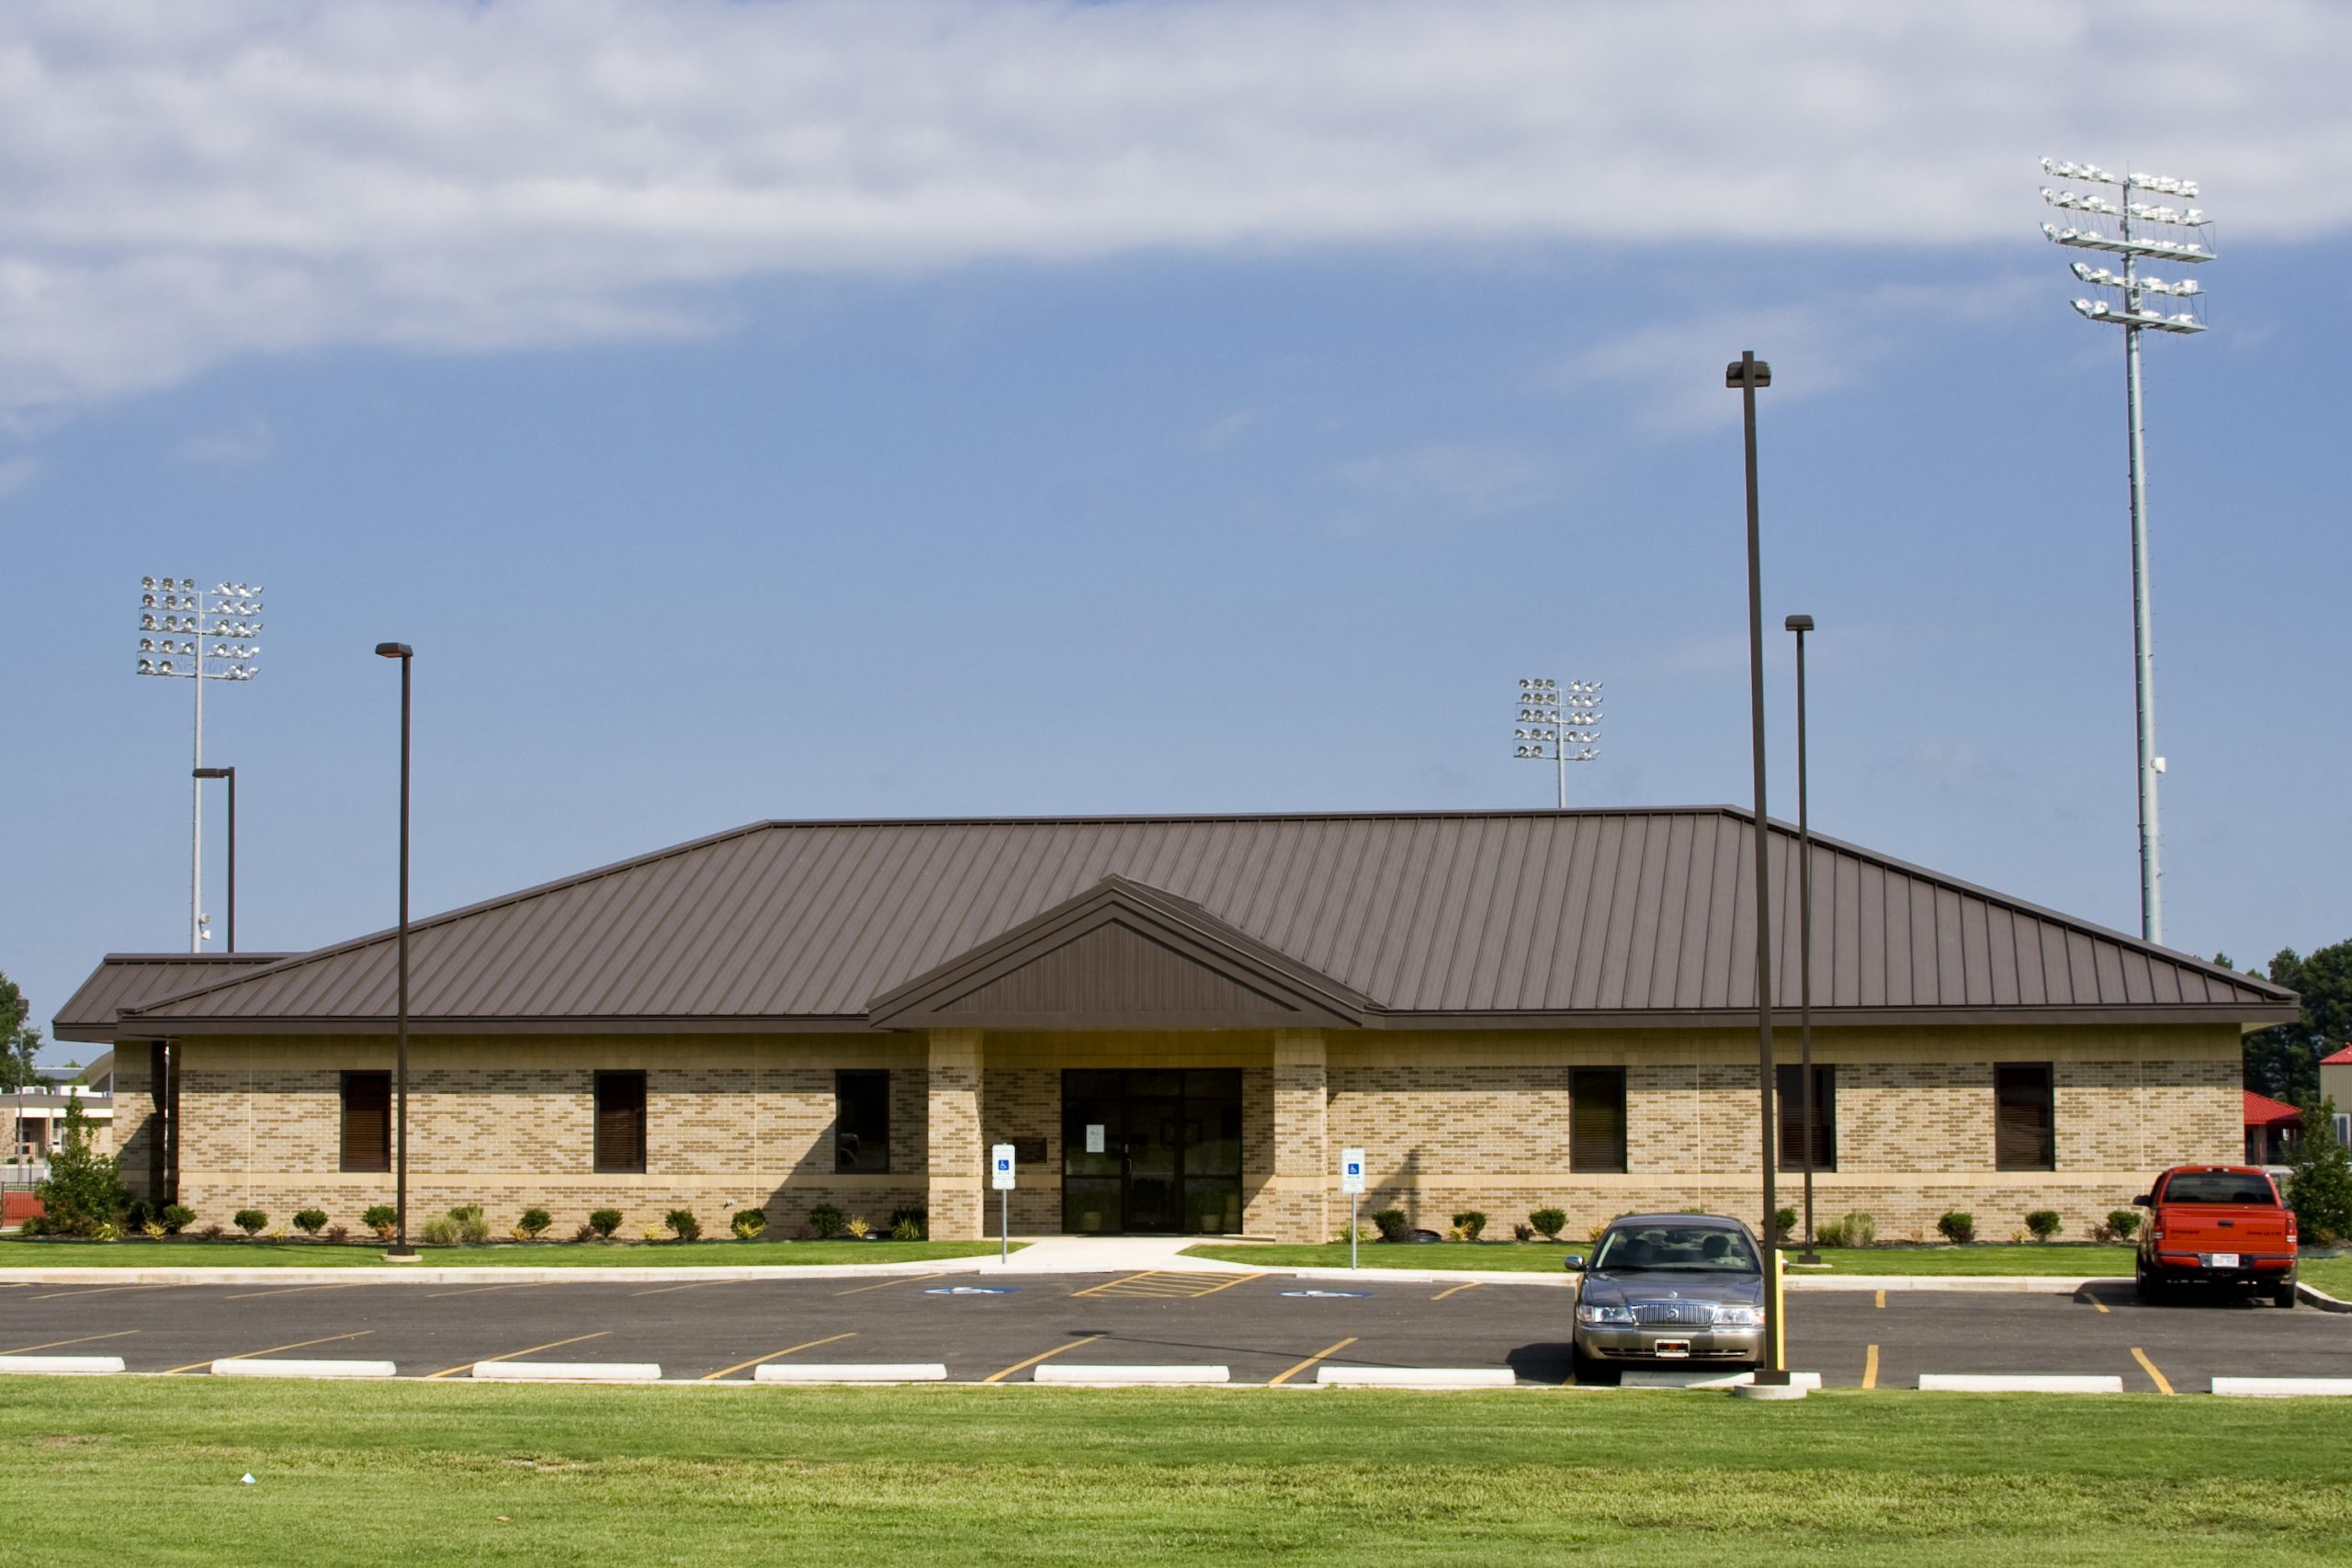 Paragould Administration building and parking lot, as photographed from the street